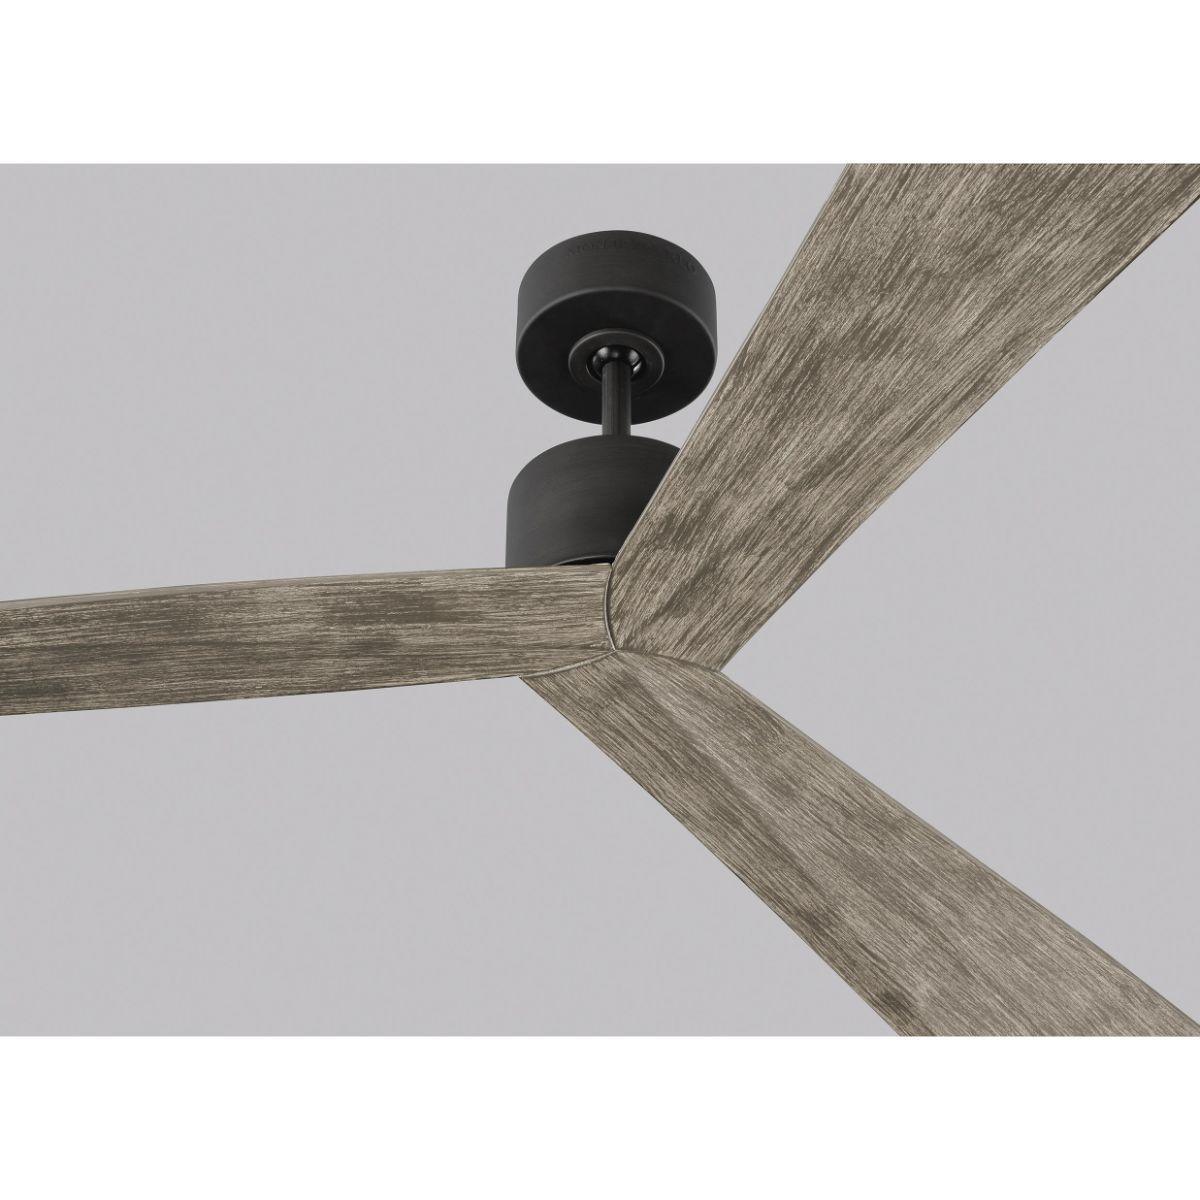 AdlerÂ 60 In. Outdoor Ceiling Fan With Remote